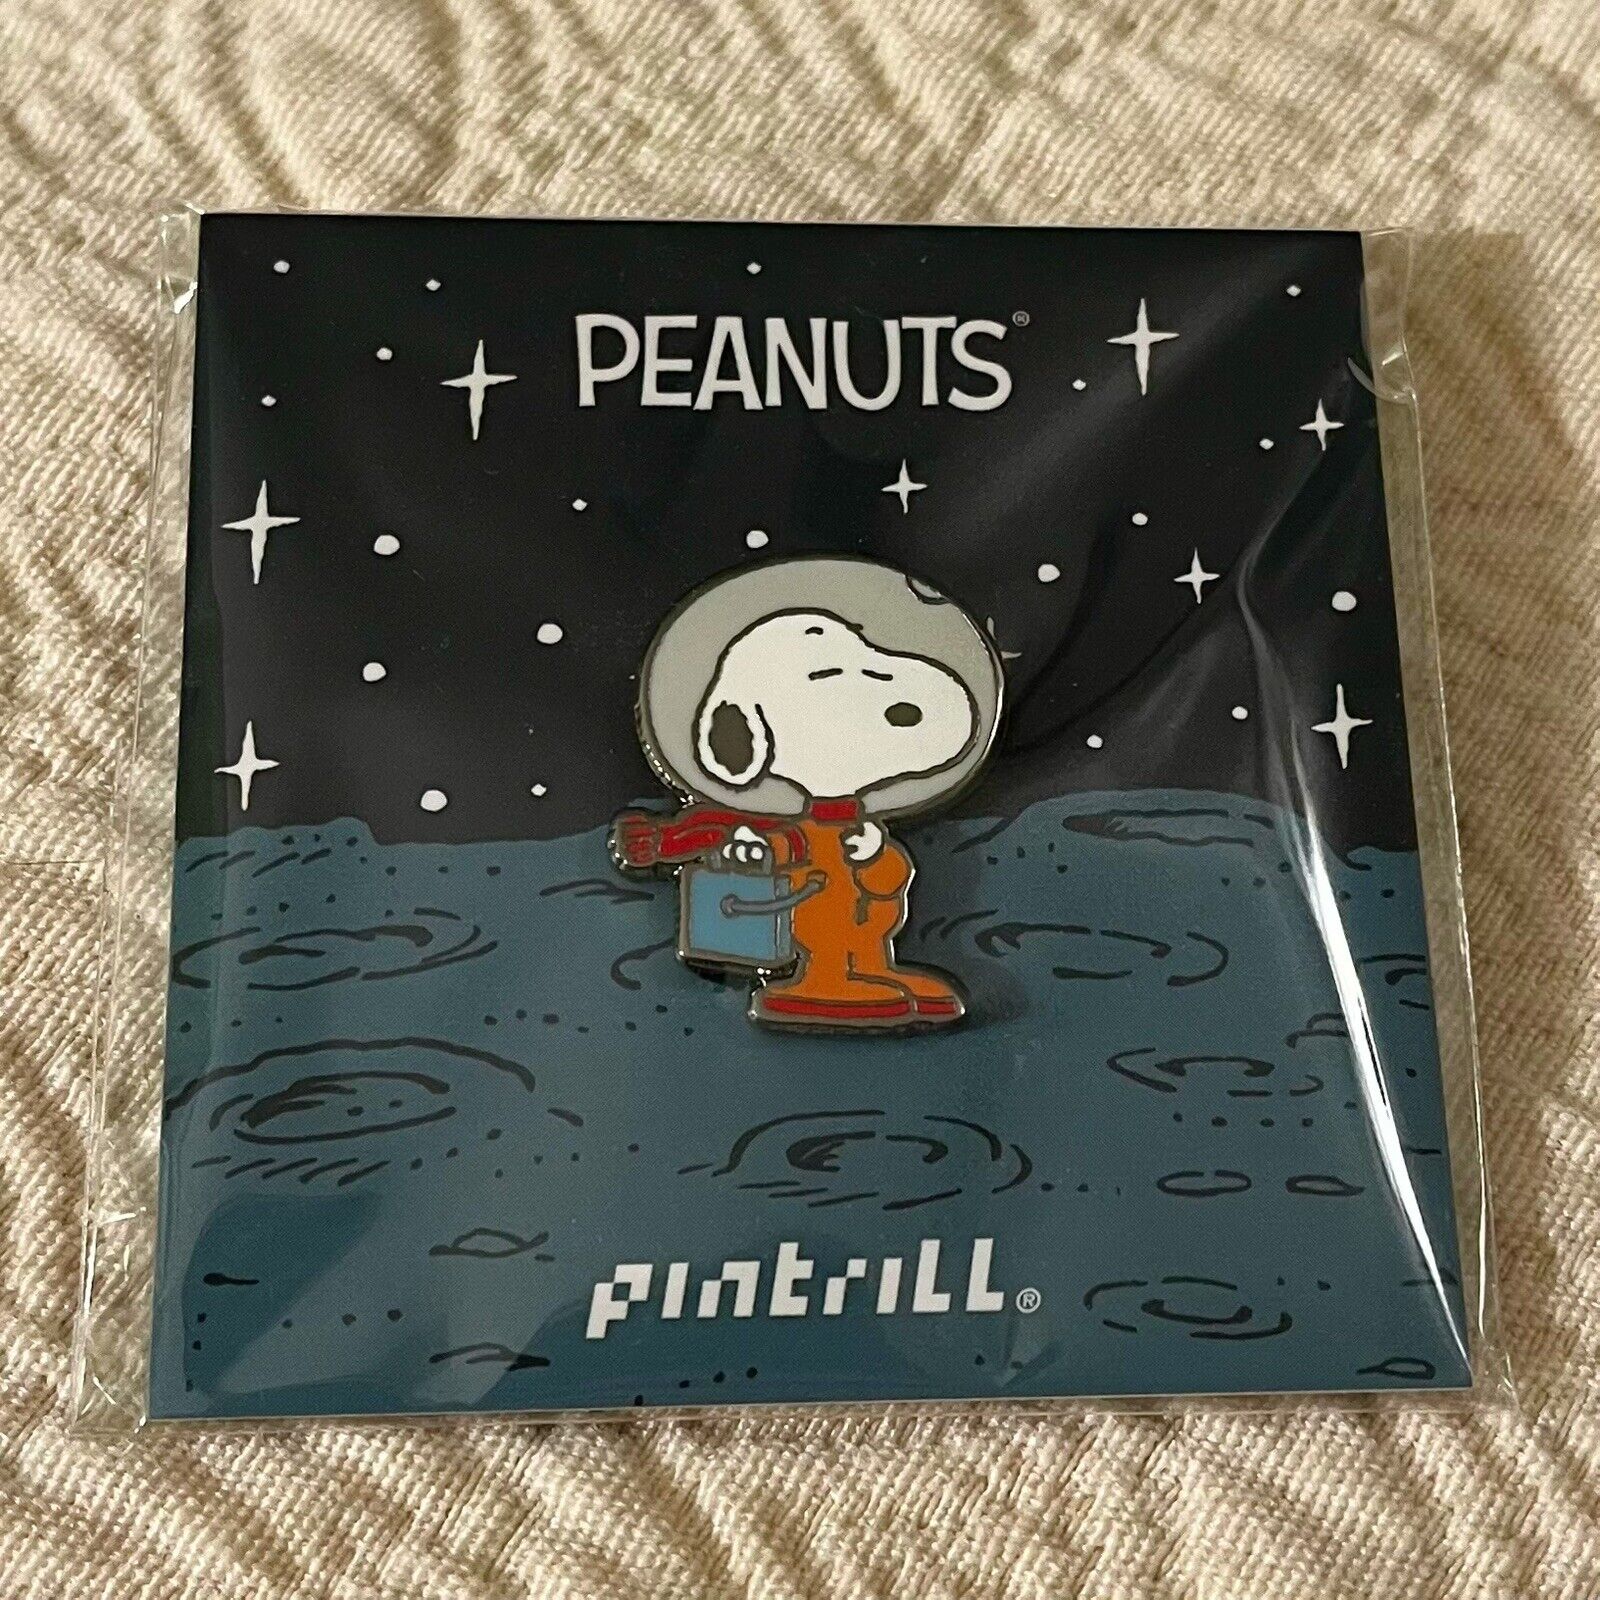 NEW Pintrill x Peanuts Charlie Brown Space Series - Astronaut Snoopy Pin